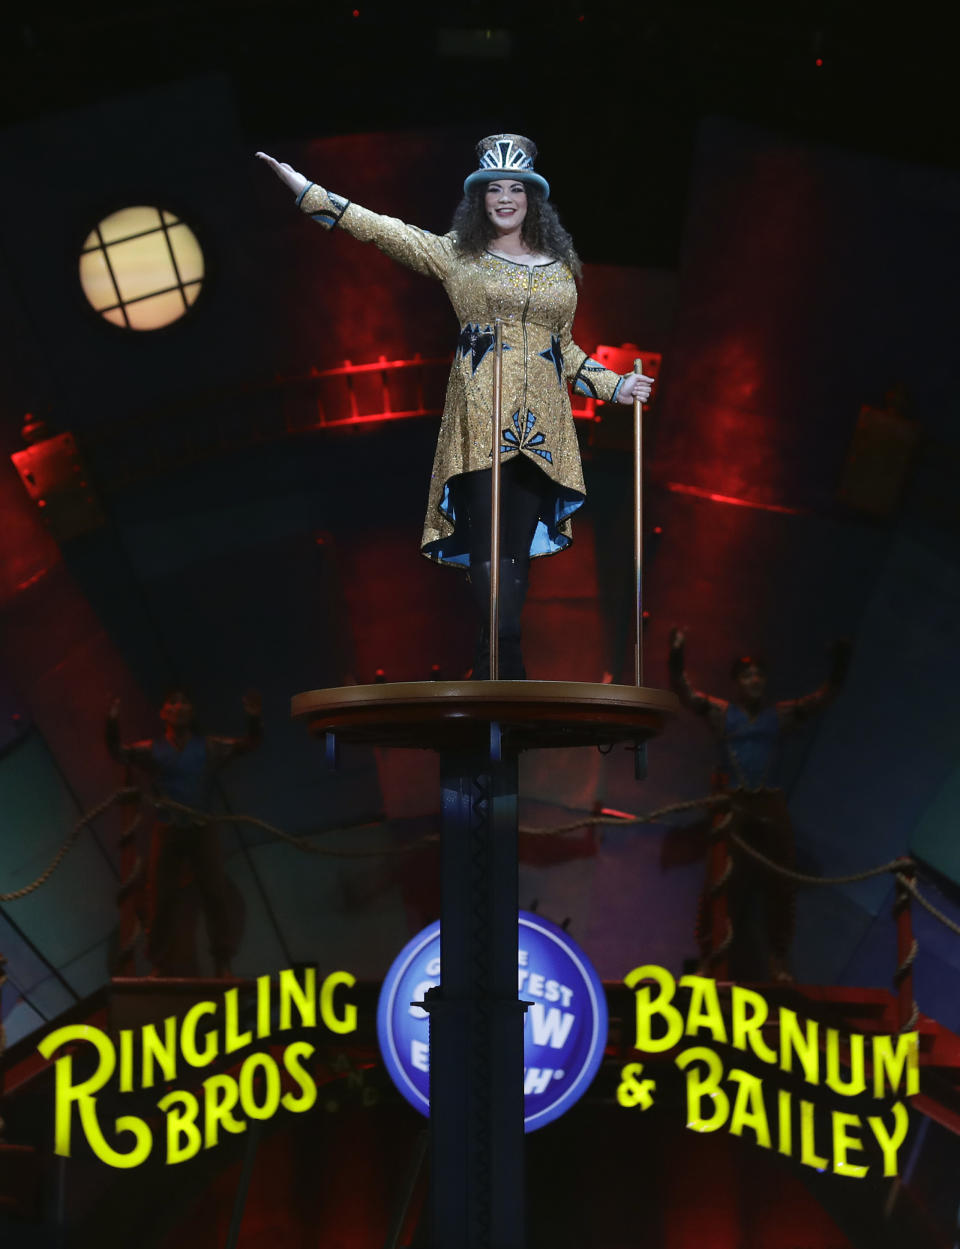 Ringling Bros. and Barnum & Bailey Ringmaster Kristen Michelle Wilson appears during a performance Saturday, Jan. 14, 2017, in Orlando, Fla. The Ringling Bros. and Barnum & Bailey Circus will end the "The Greatest Show on Earth" in May, following a 146-year run of performances. Kenneth Feld, the chairman and CEO of Feld Entertainment, which owns the circus, told The Associated Press, declining attendance combined with high operating costs are among the reasons for closing. (AP Photo/Chris O'Meara)